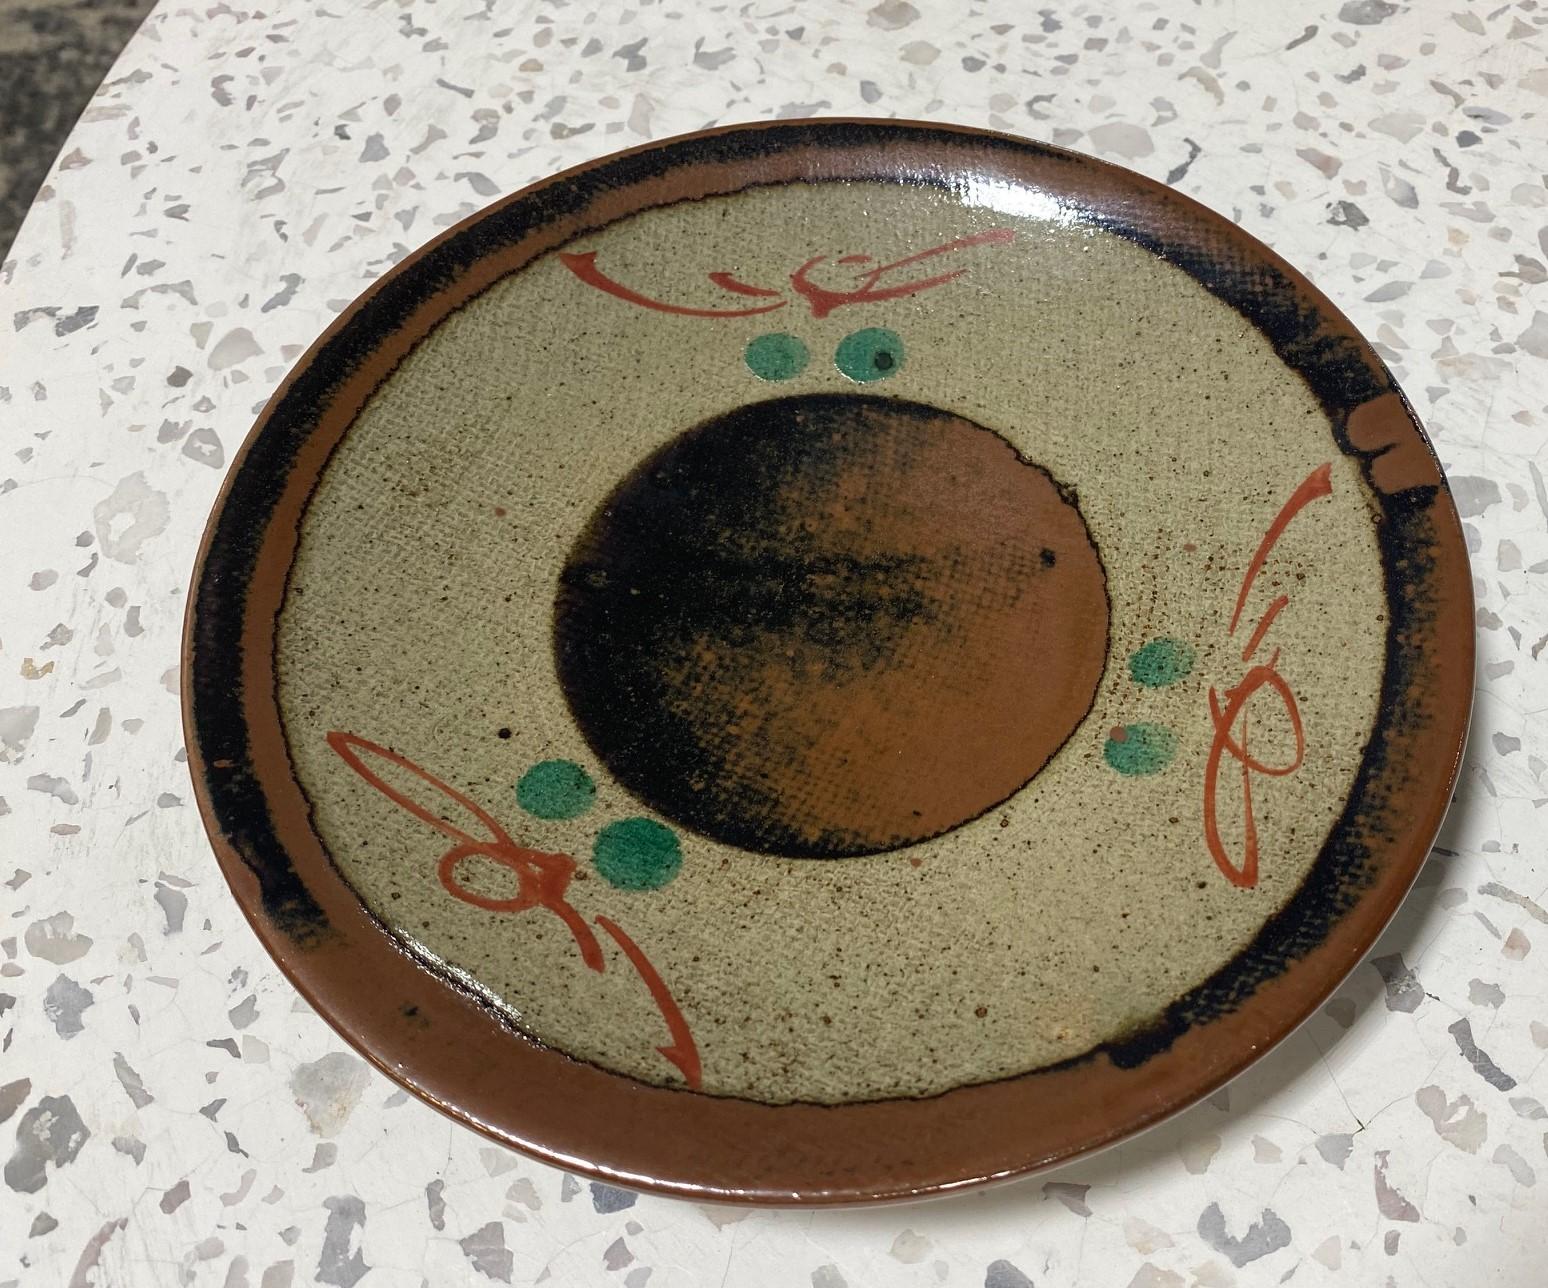 A wonderfully decorated and executed Mashiko pottery low bowl/ plate attributed to Japanese National Treasure pottery master Tatsuzo Shimaoka (this work is not signed/marked but his earlier works were not signed). This work exhibits his signature